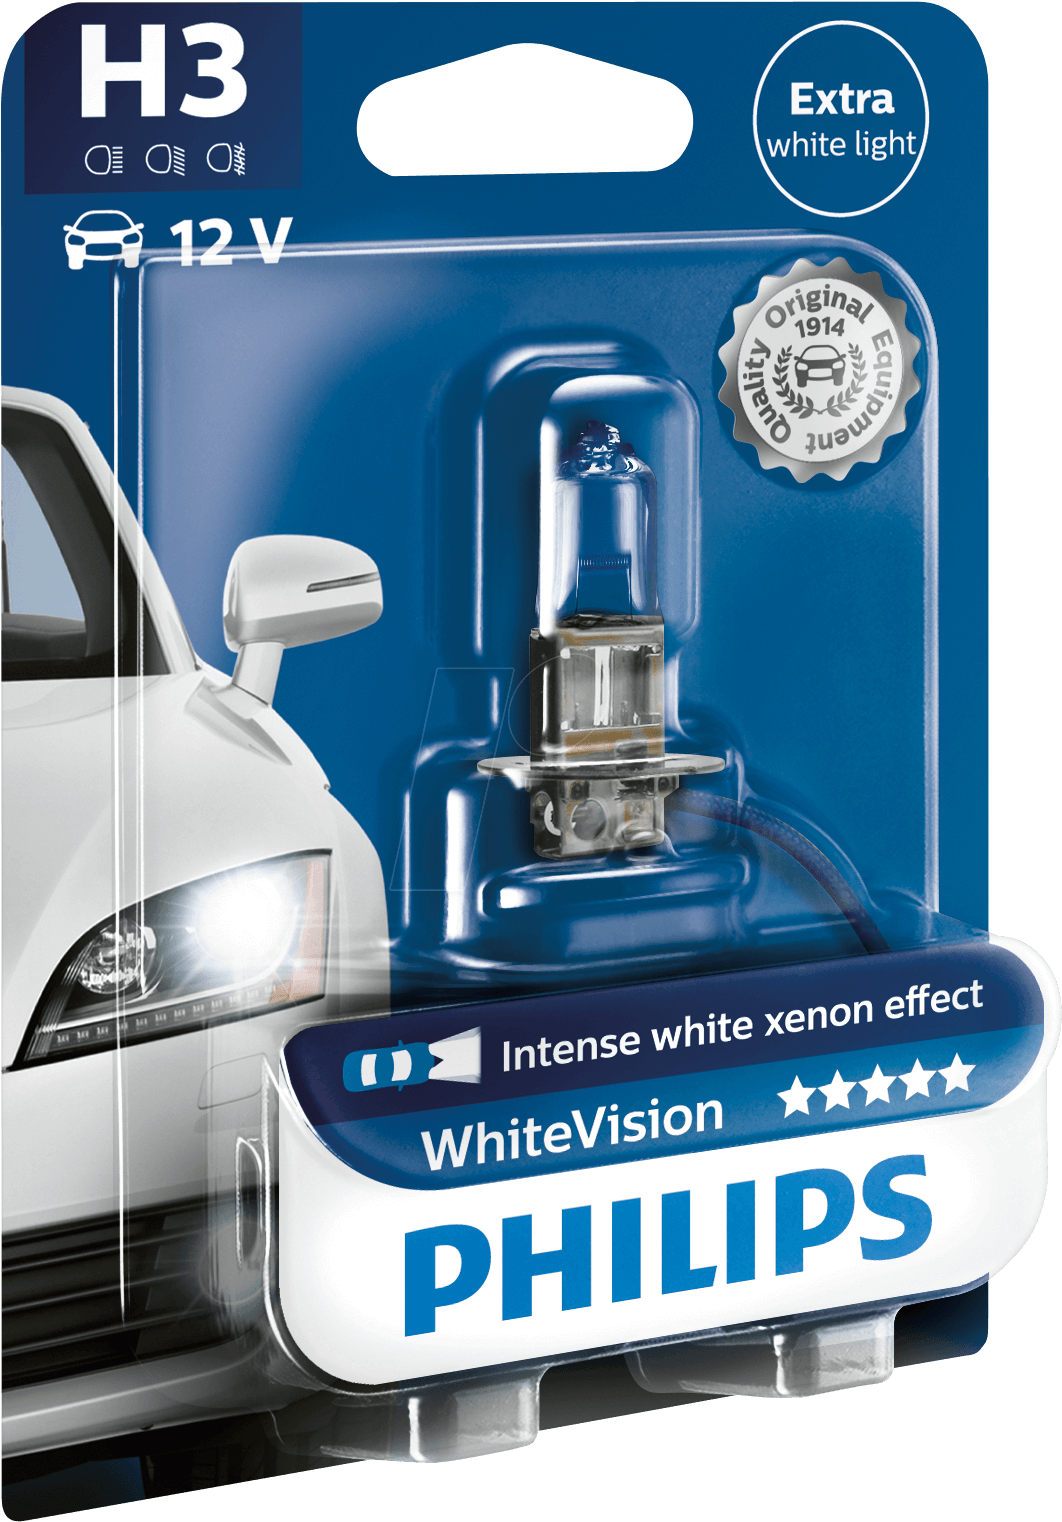 H3 Headlight Bulb Philips White Vision, Single Unit - Philips H1 Whitevision Car Bulb (1127x1567), Png Download